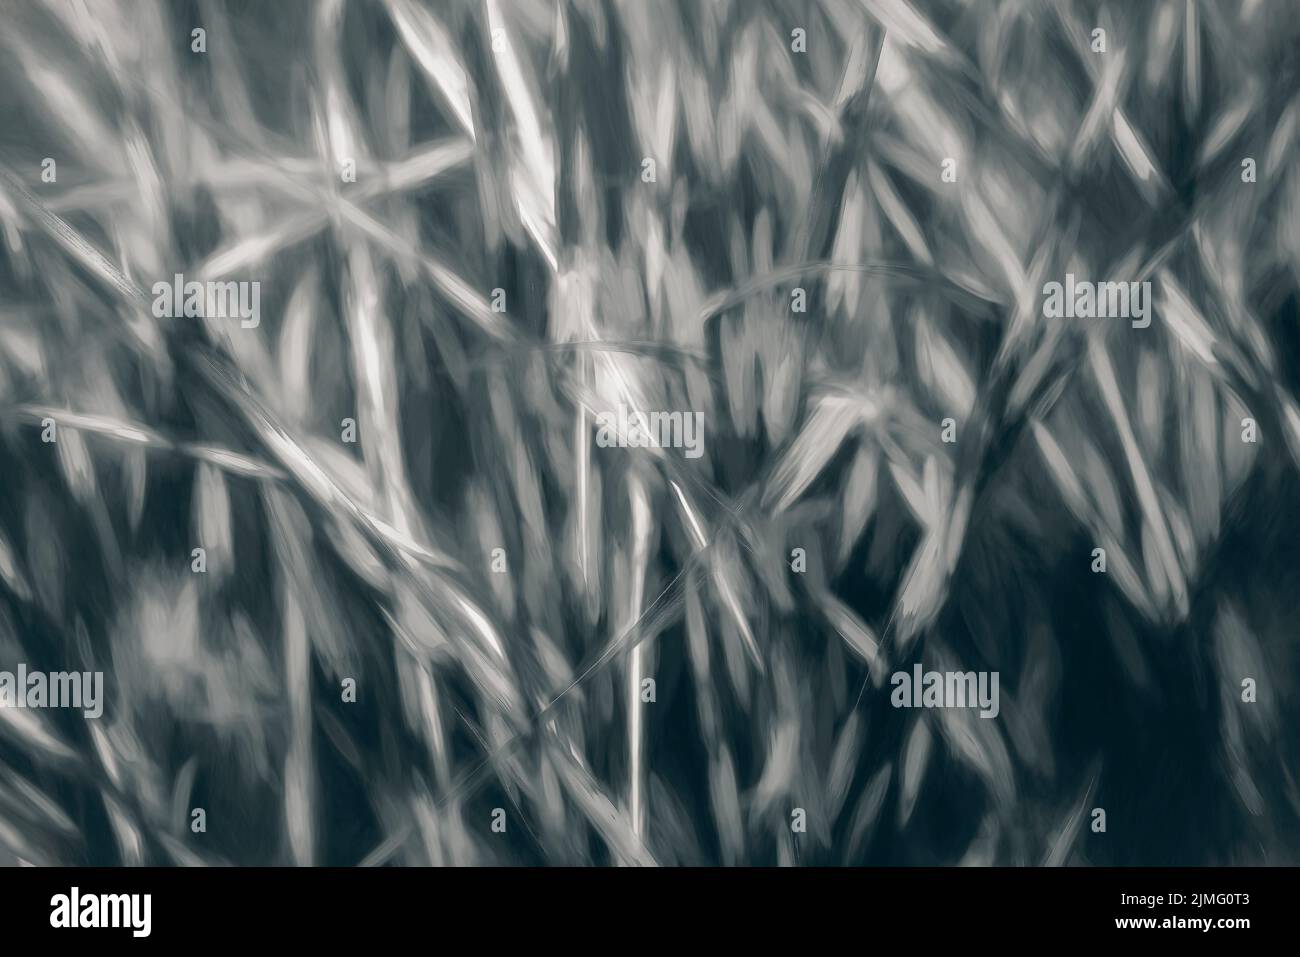 Blades of grass as abstract background Stock Photo